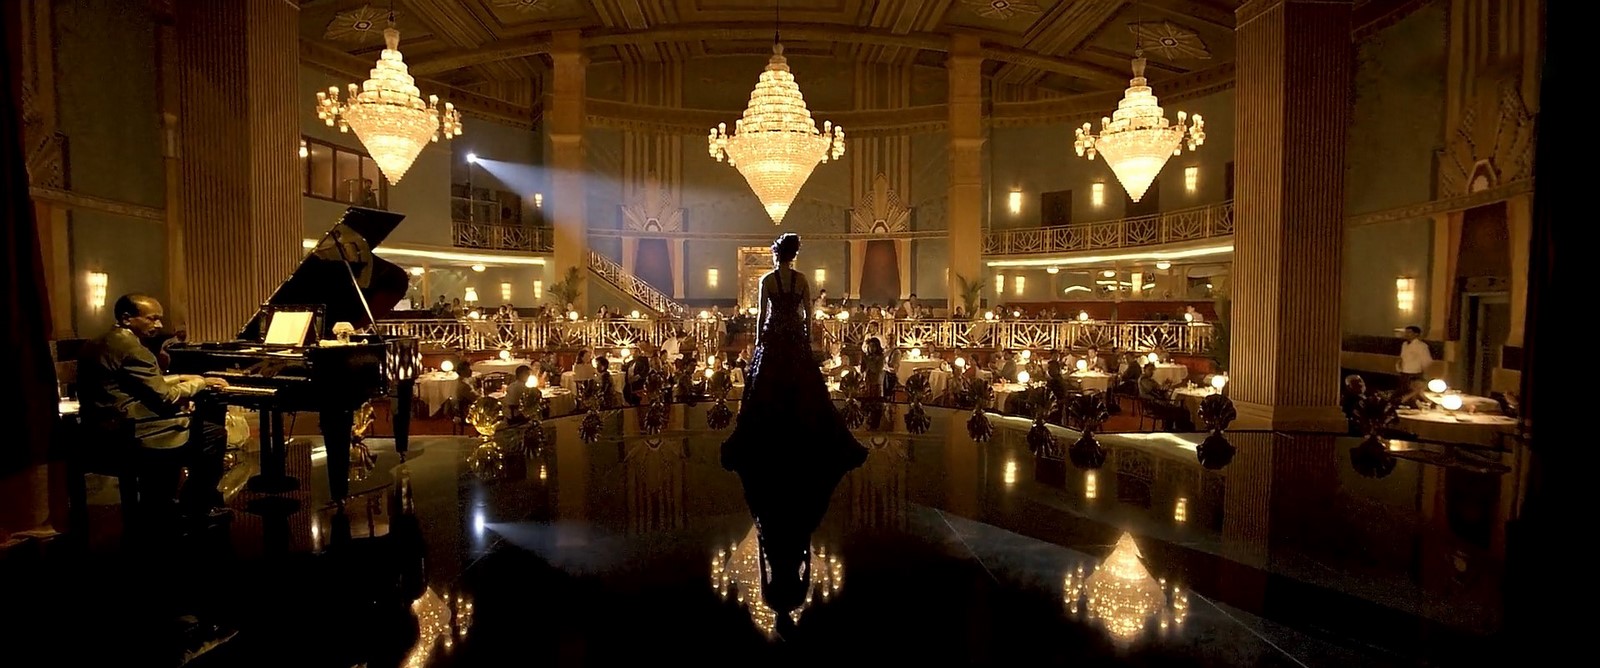 An architectural review of Bombay Velvet - Sheet19